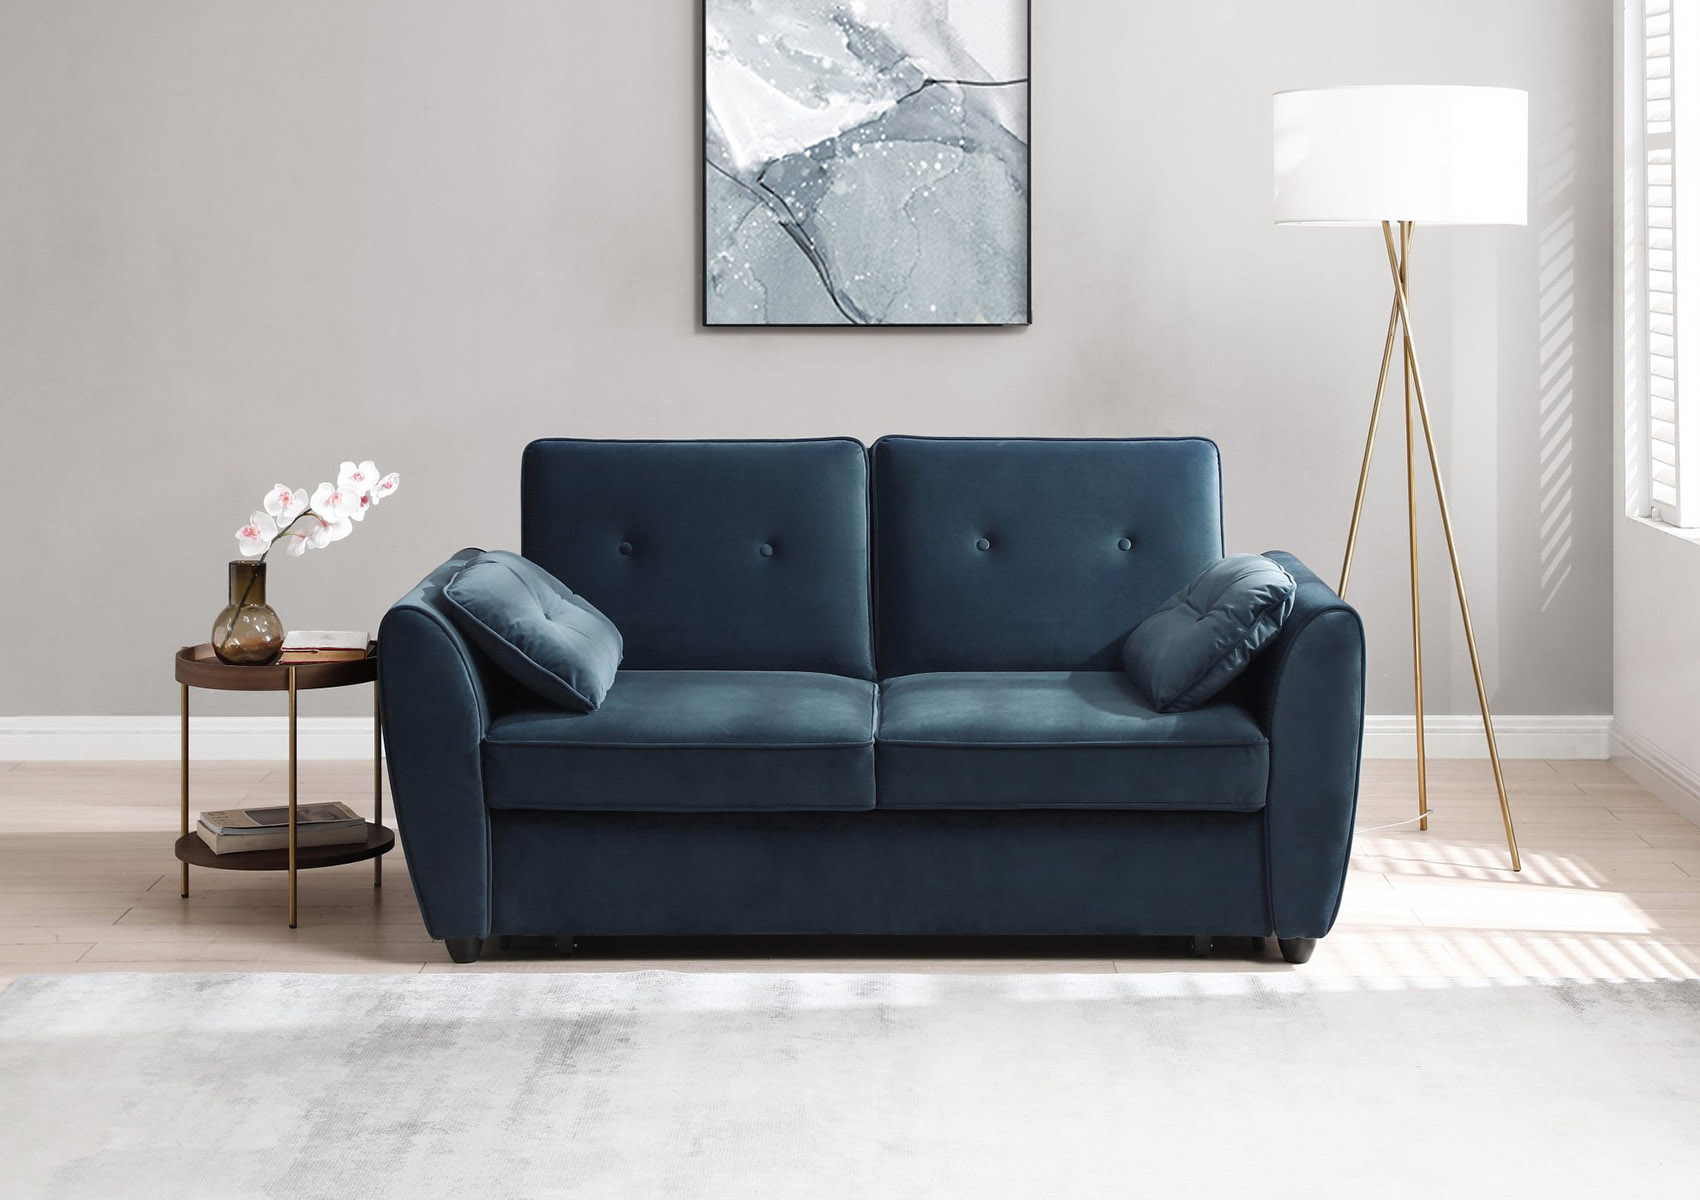 View Osiris 2 Seater Ink Blue Sofa Bed Time4Sleep information